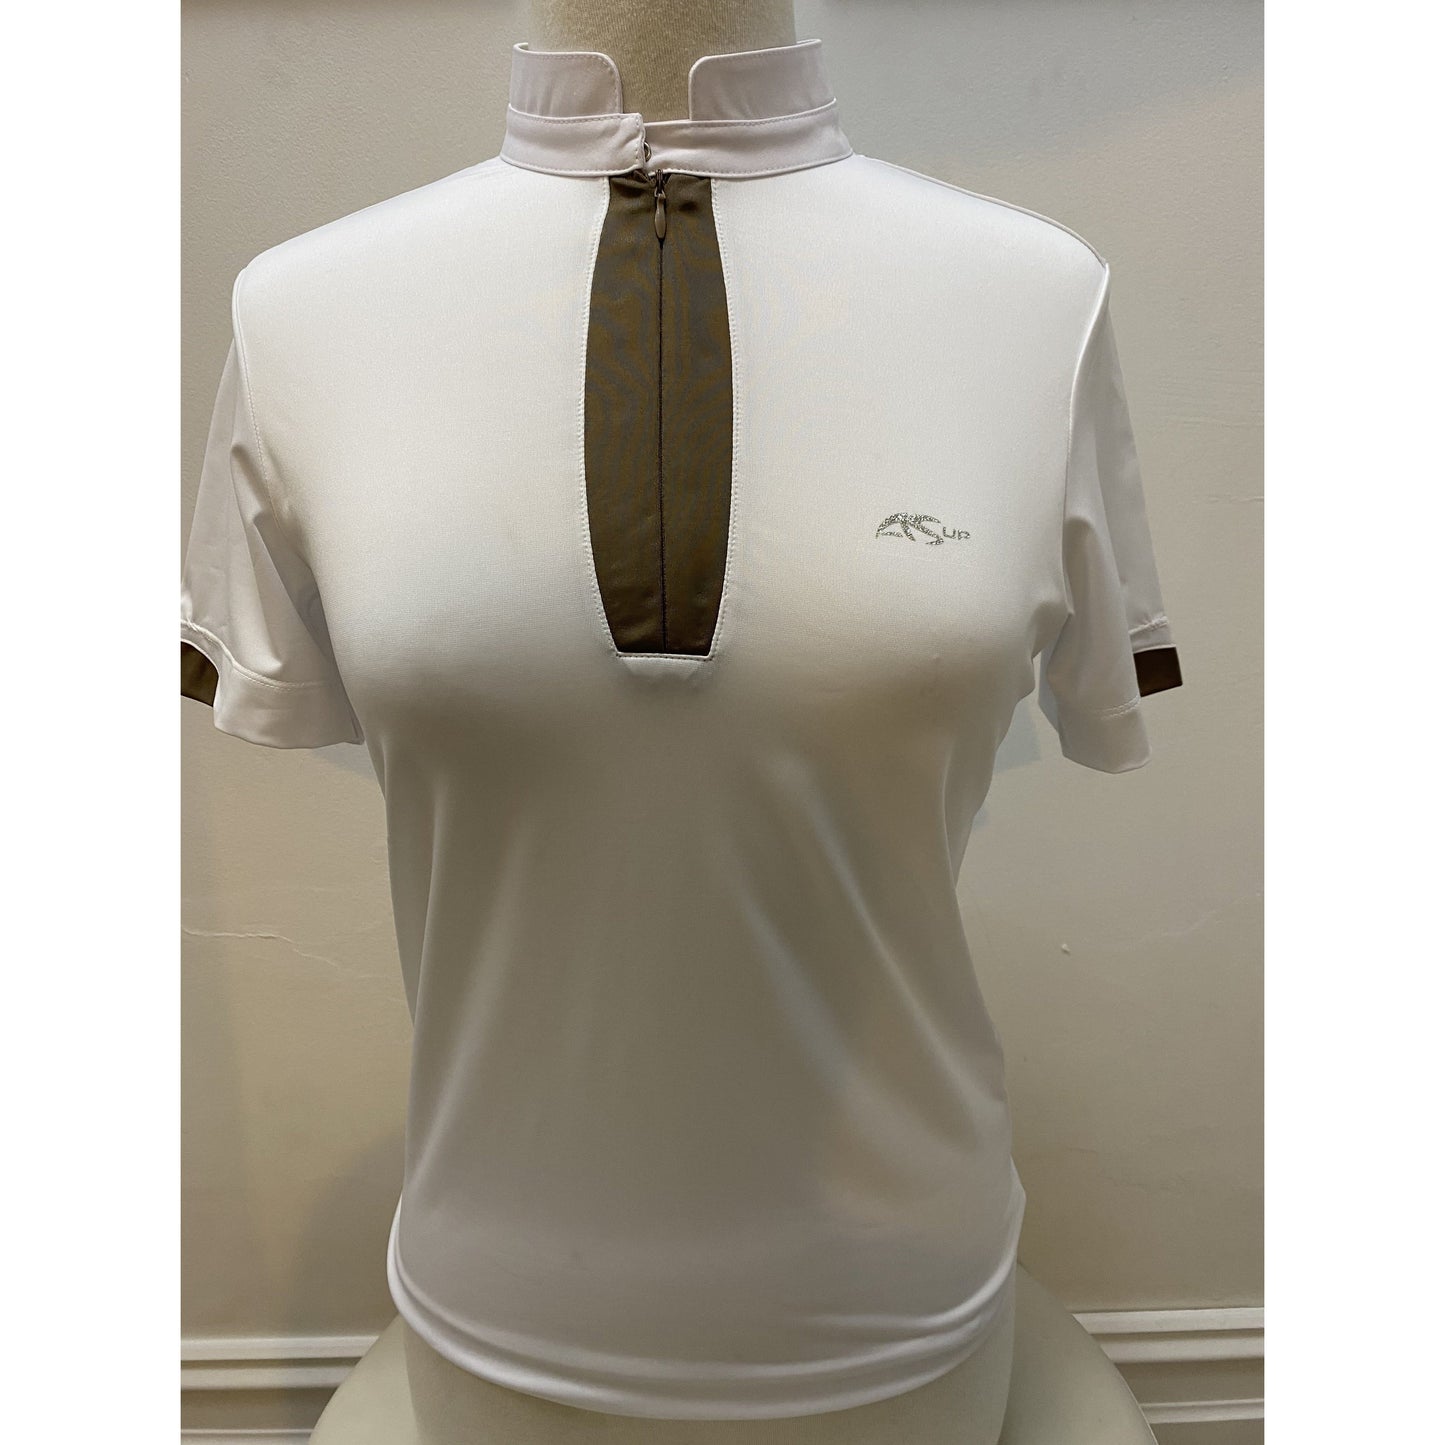 Anna Scarpati white polo shirt with collar on mannequin display.